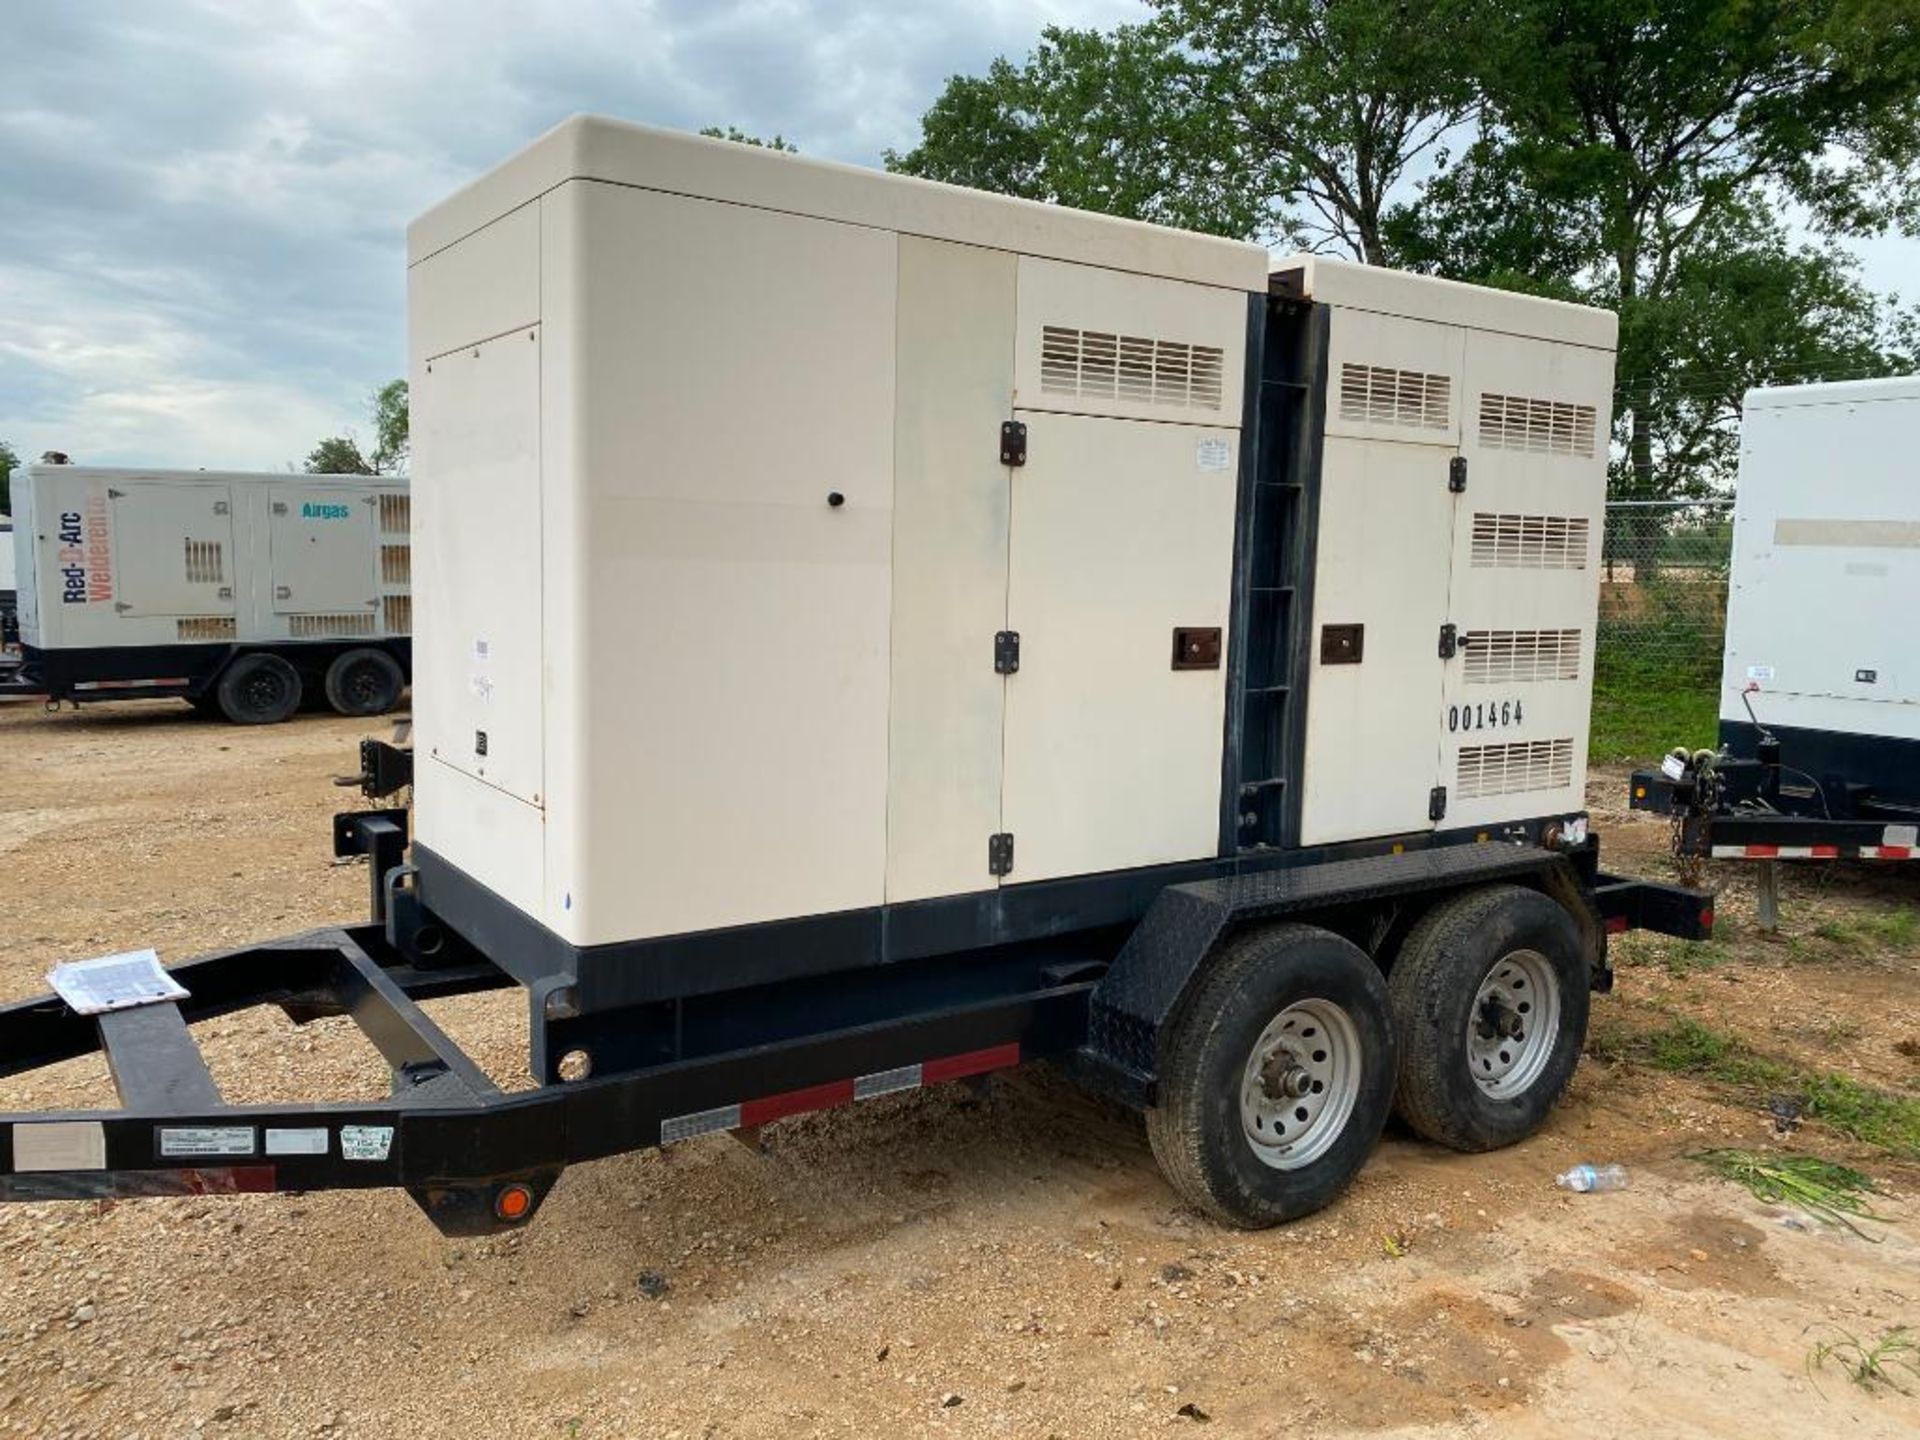 2014 AltaStream Power Systems 125 KVA Towable Generator, Dual Fuel Natural Gas or LP, Model APHG150- - Image 2 of 12